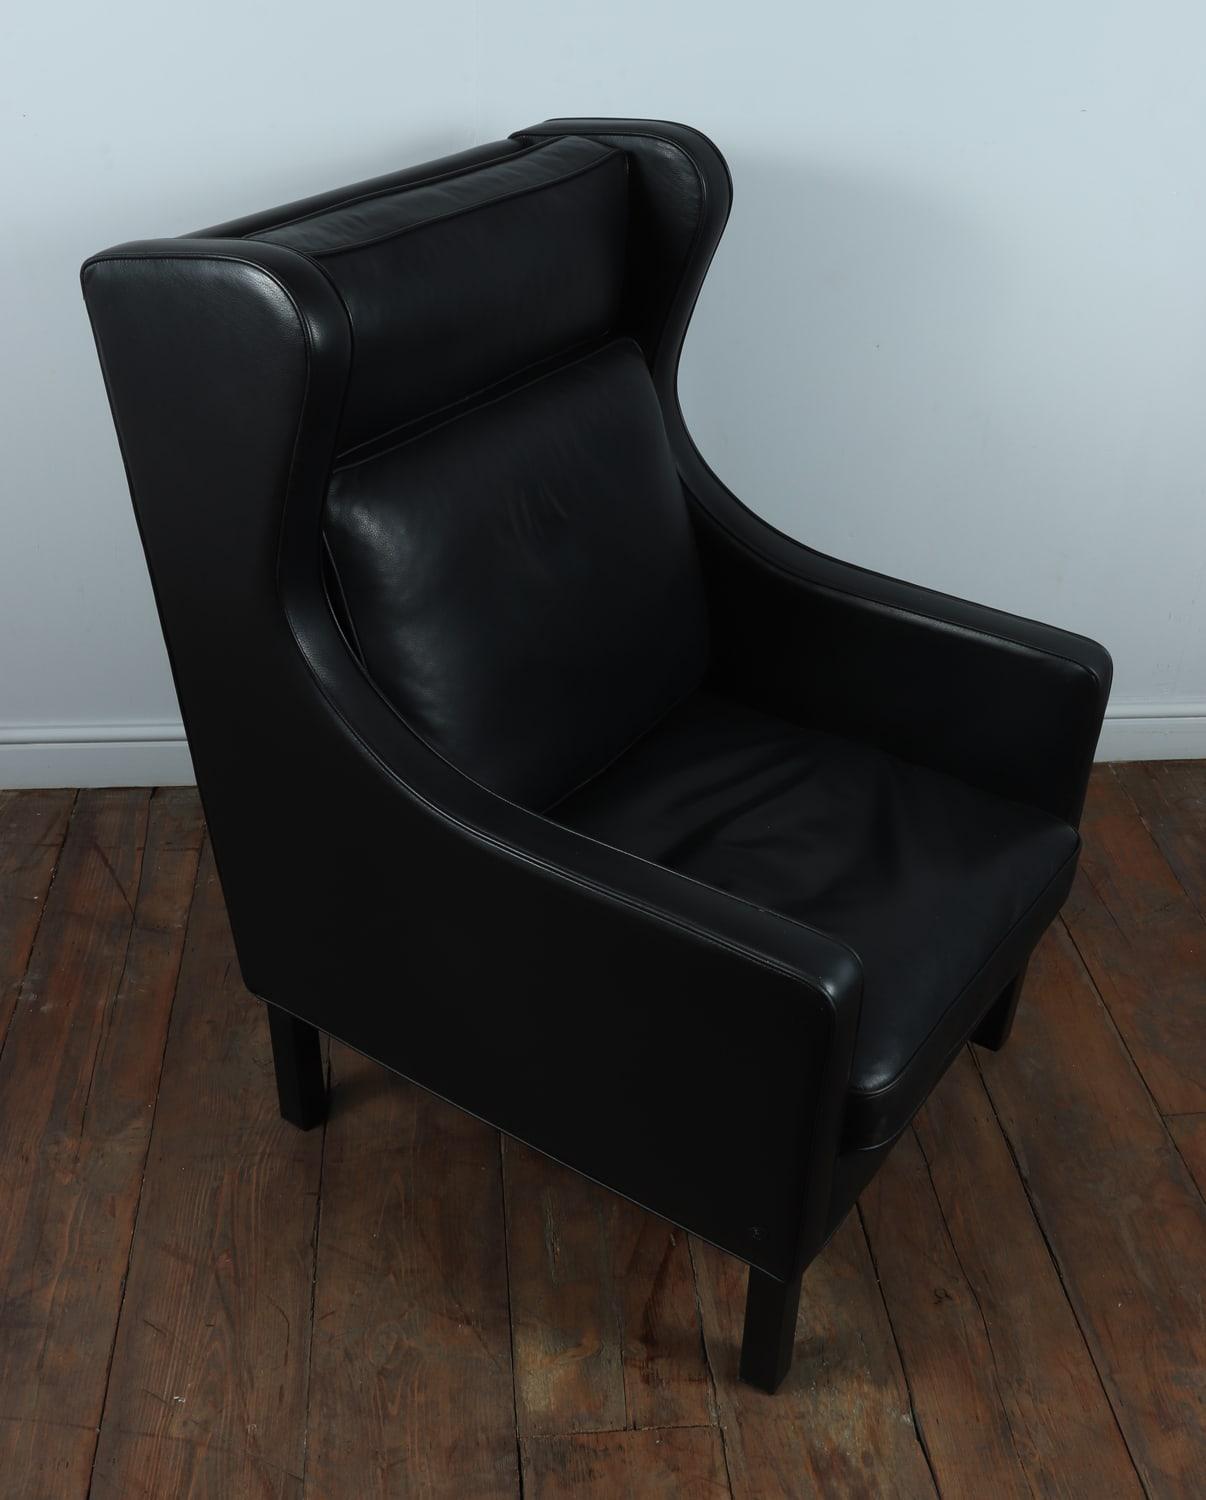 Late 20th Century Danish, Mid-Century Modern, Wing Chair in Black Leather by Hurup, circa 1980 For Sale